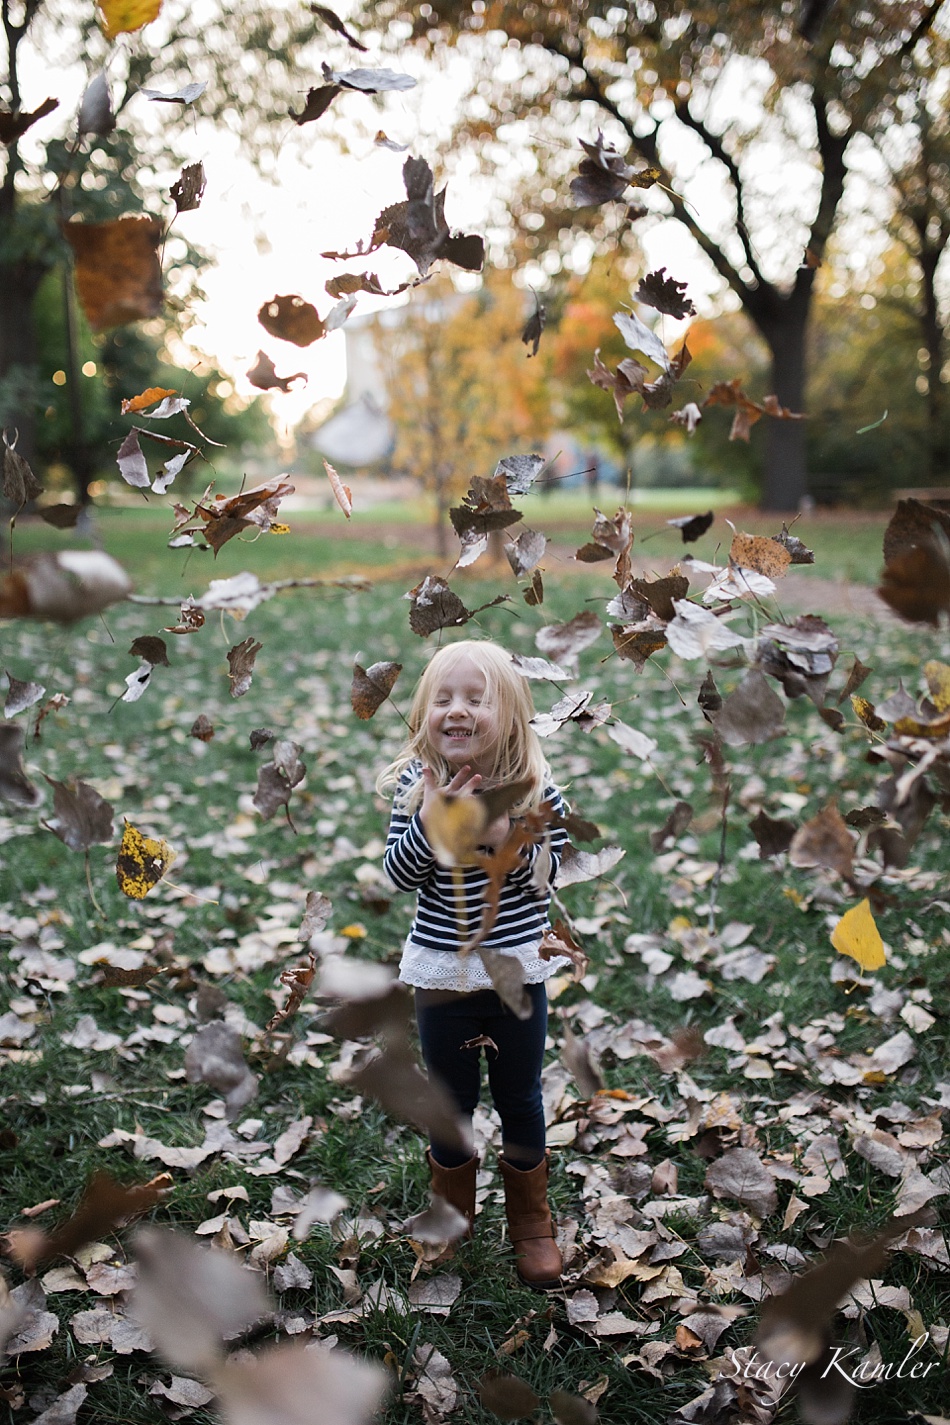 Throwing Leaves at East Campus